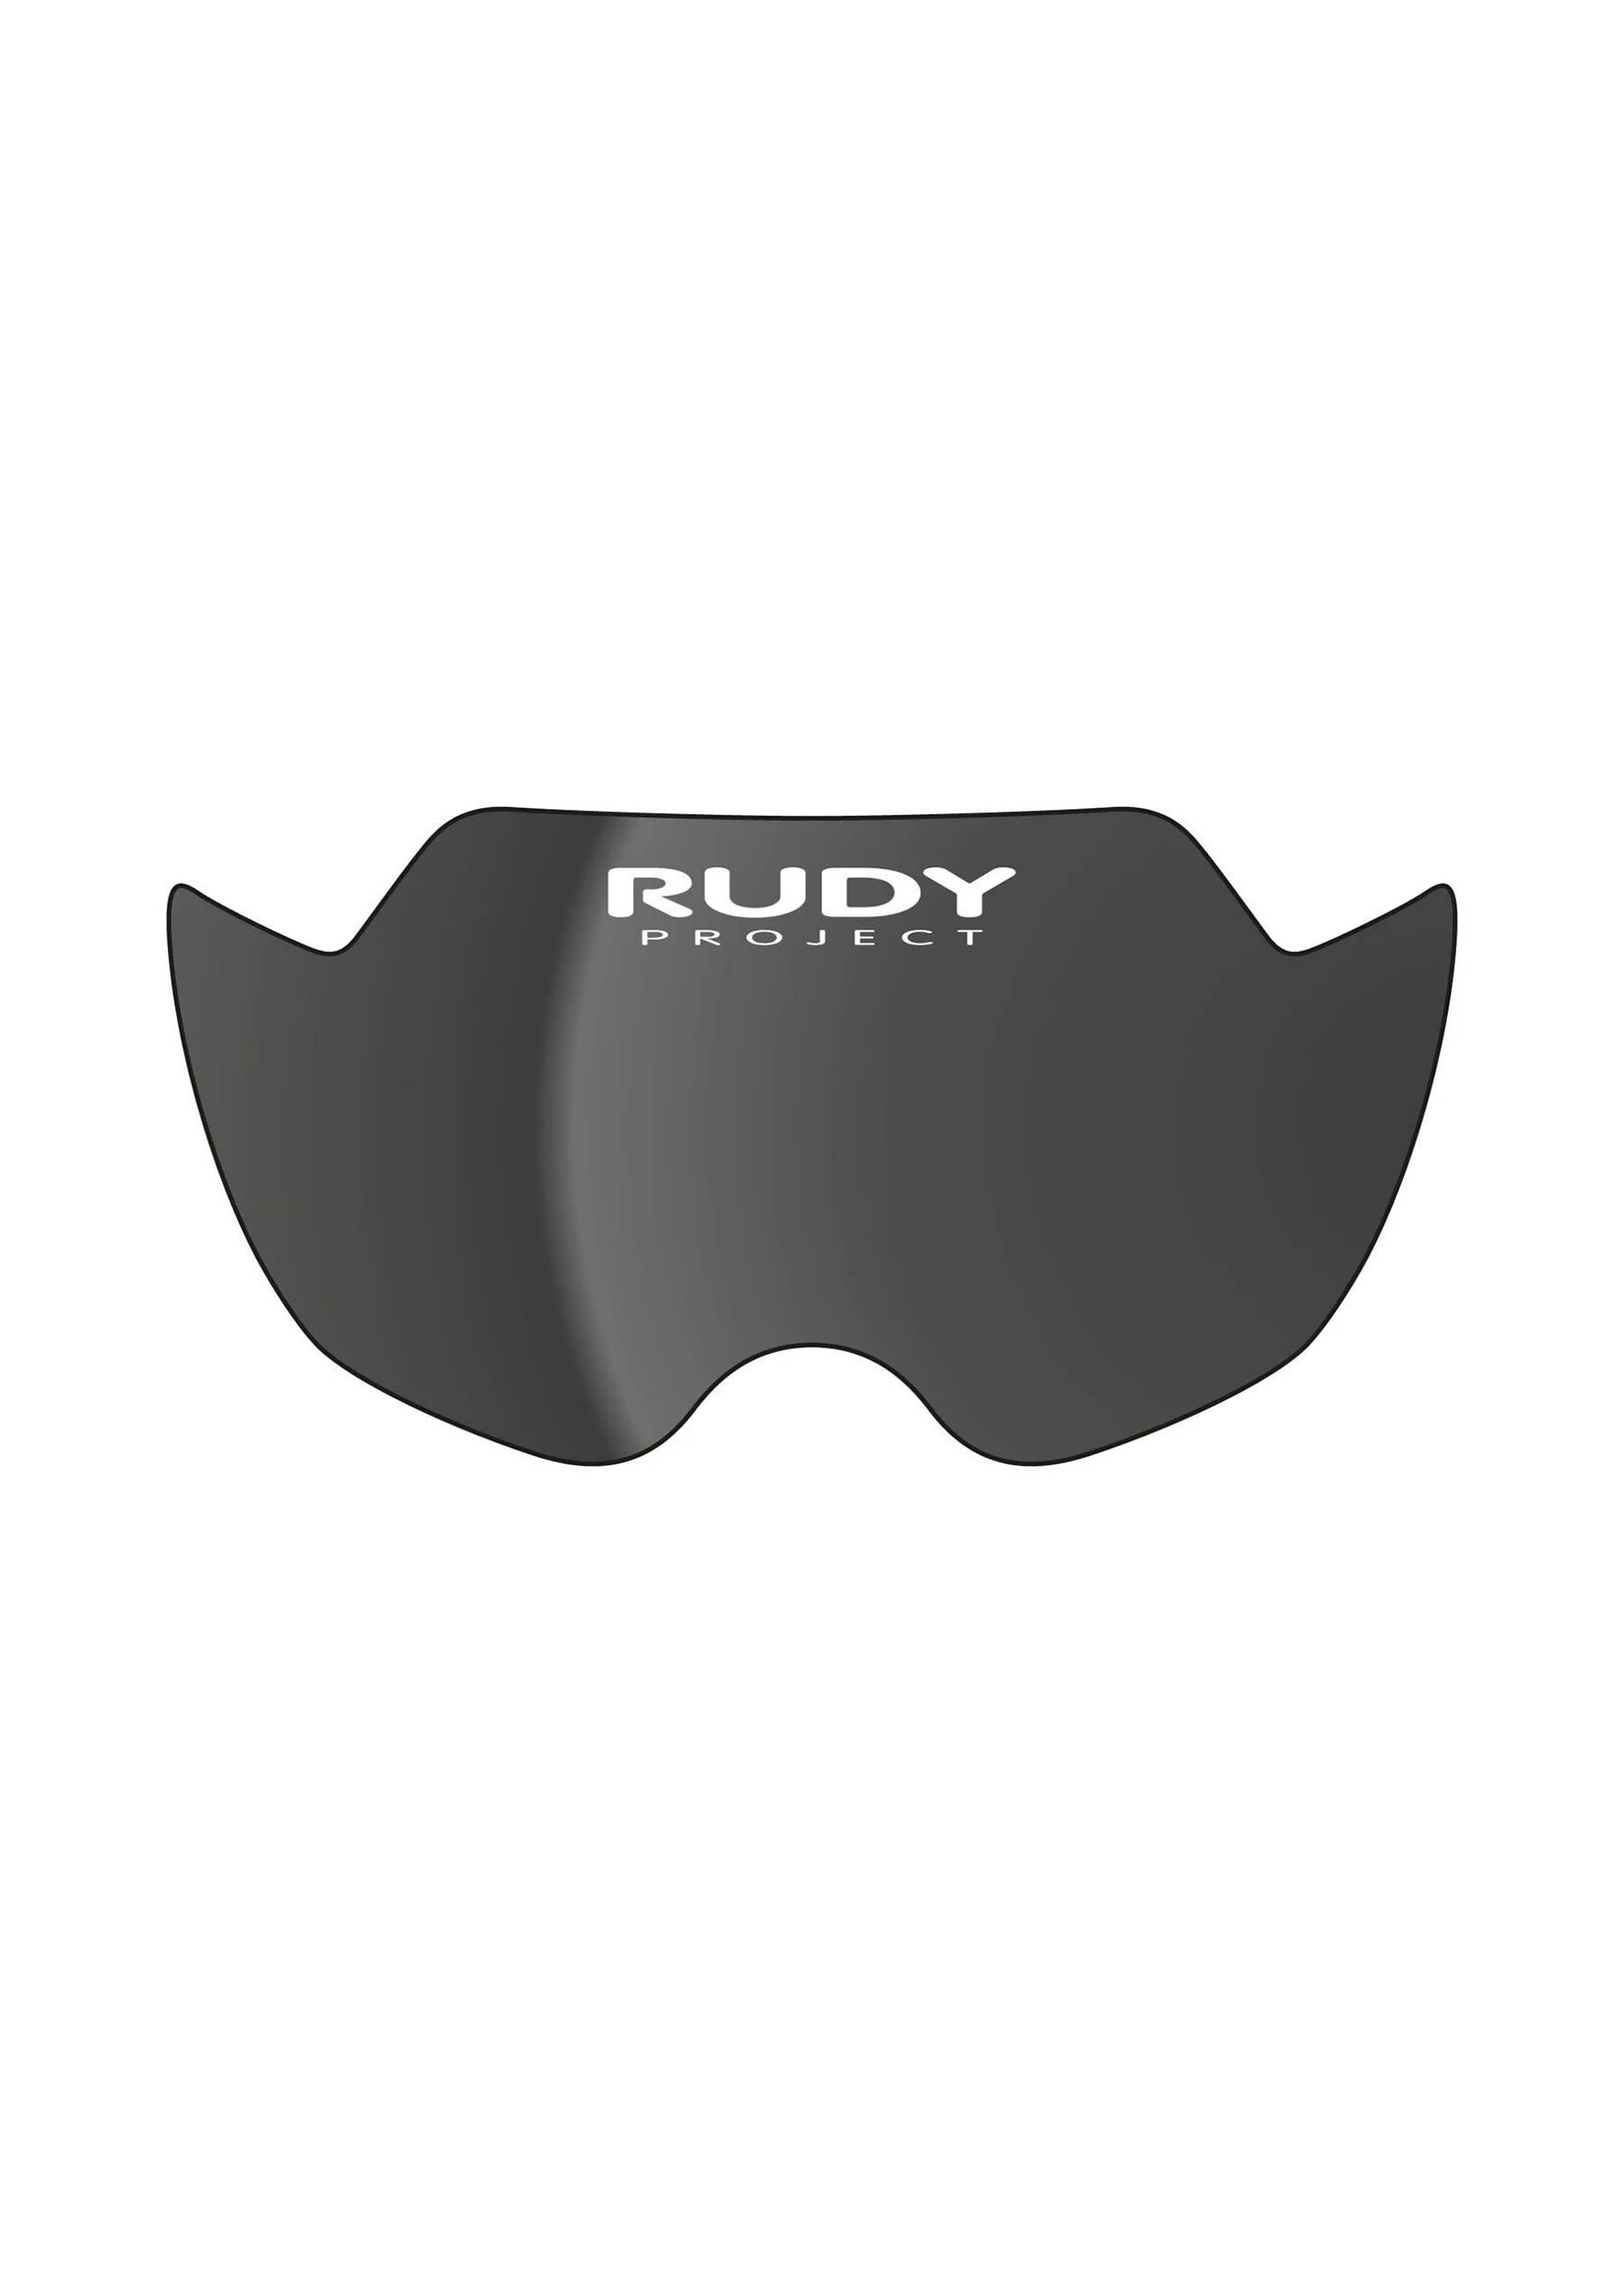 Rudy Project THE WING REPLACEMENT OPTICAL SHIELD